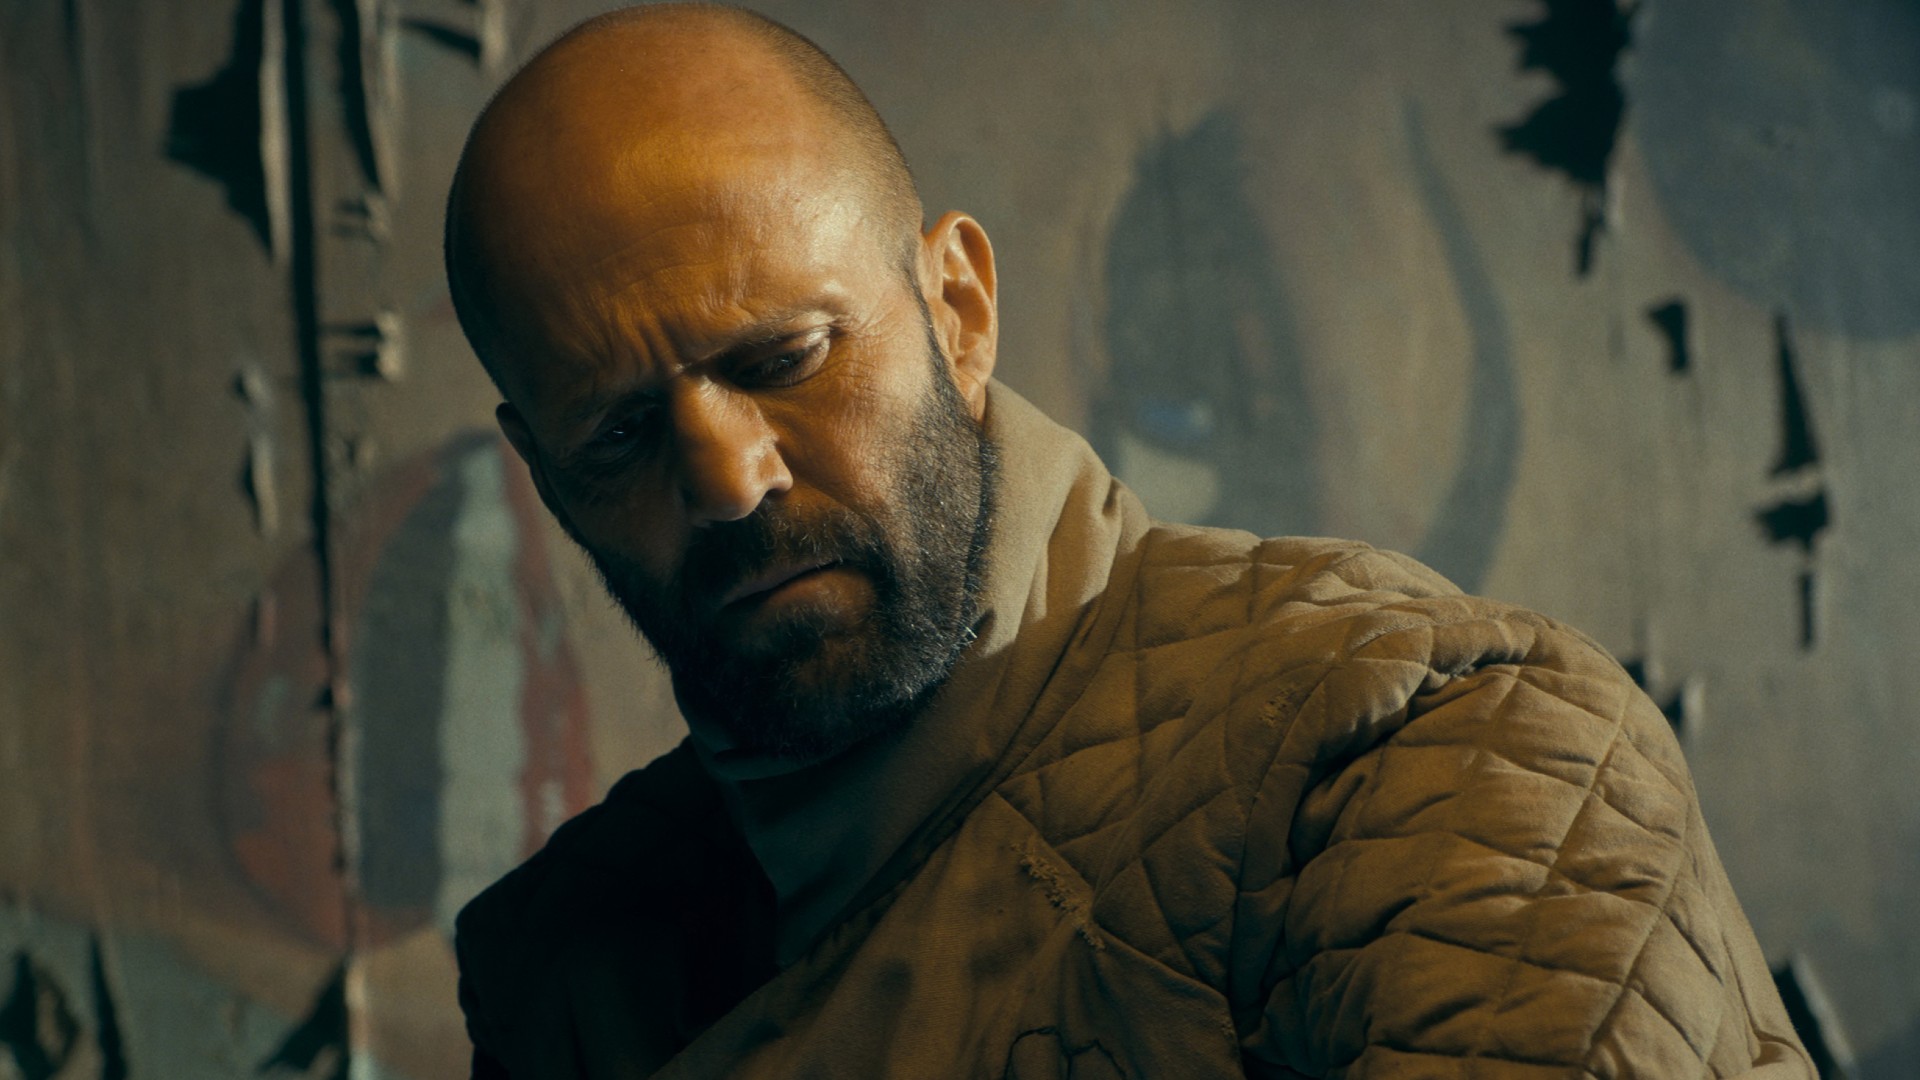 Jason Statham broods in a still from The Beekeeper